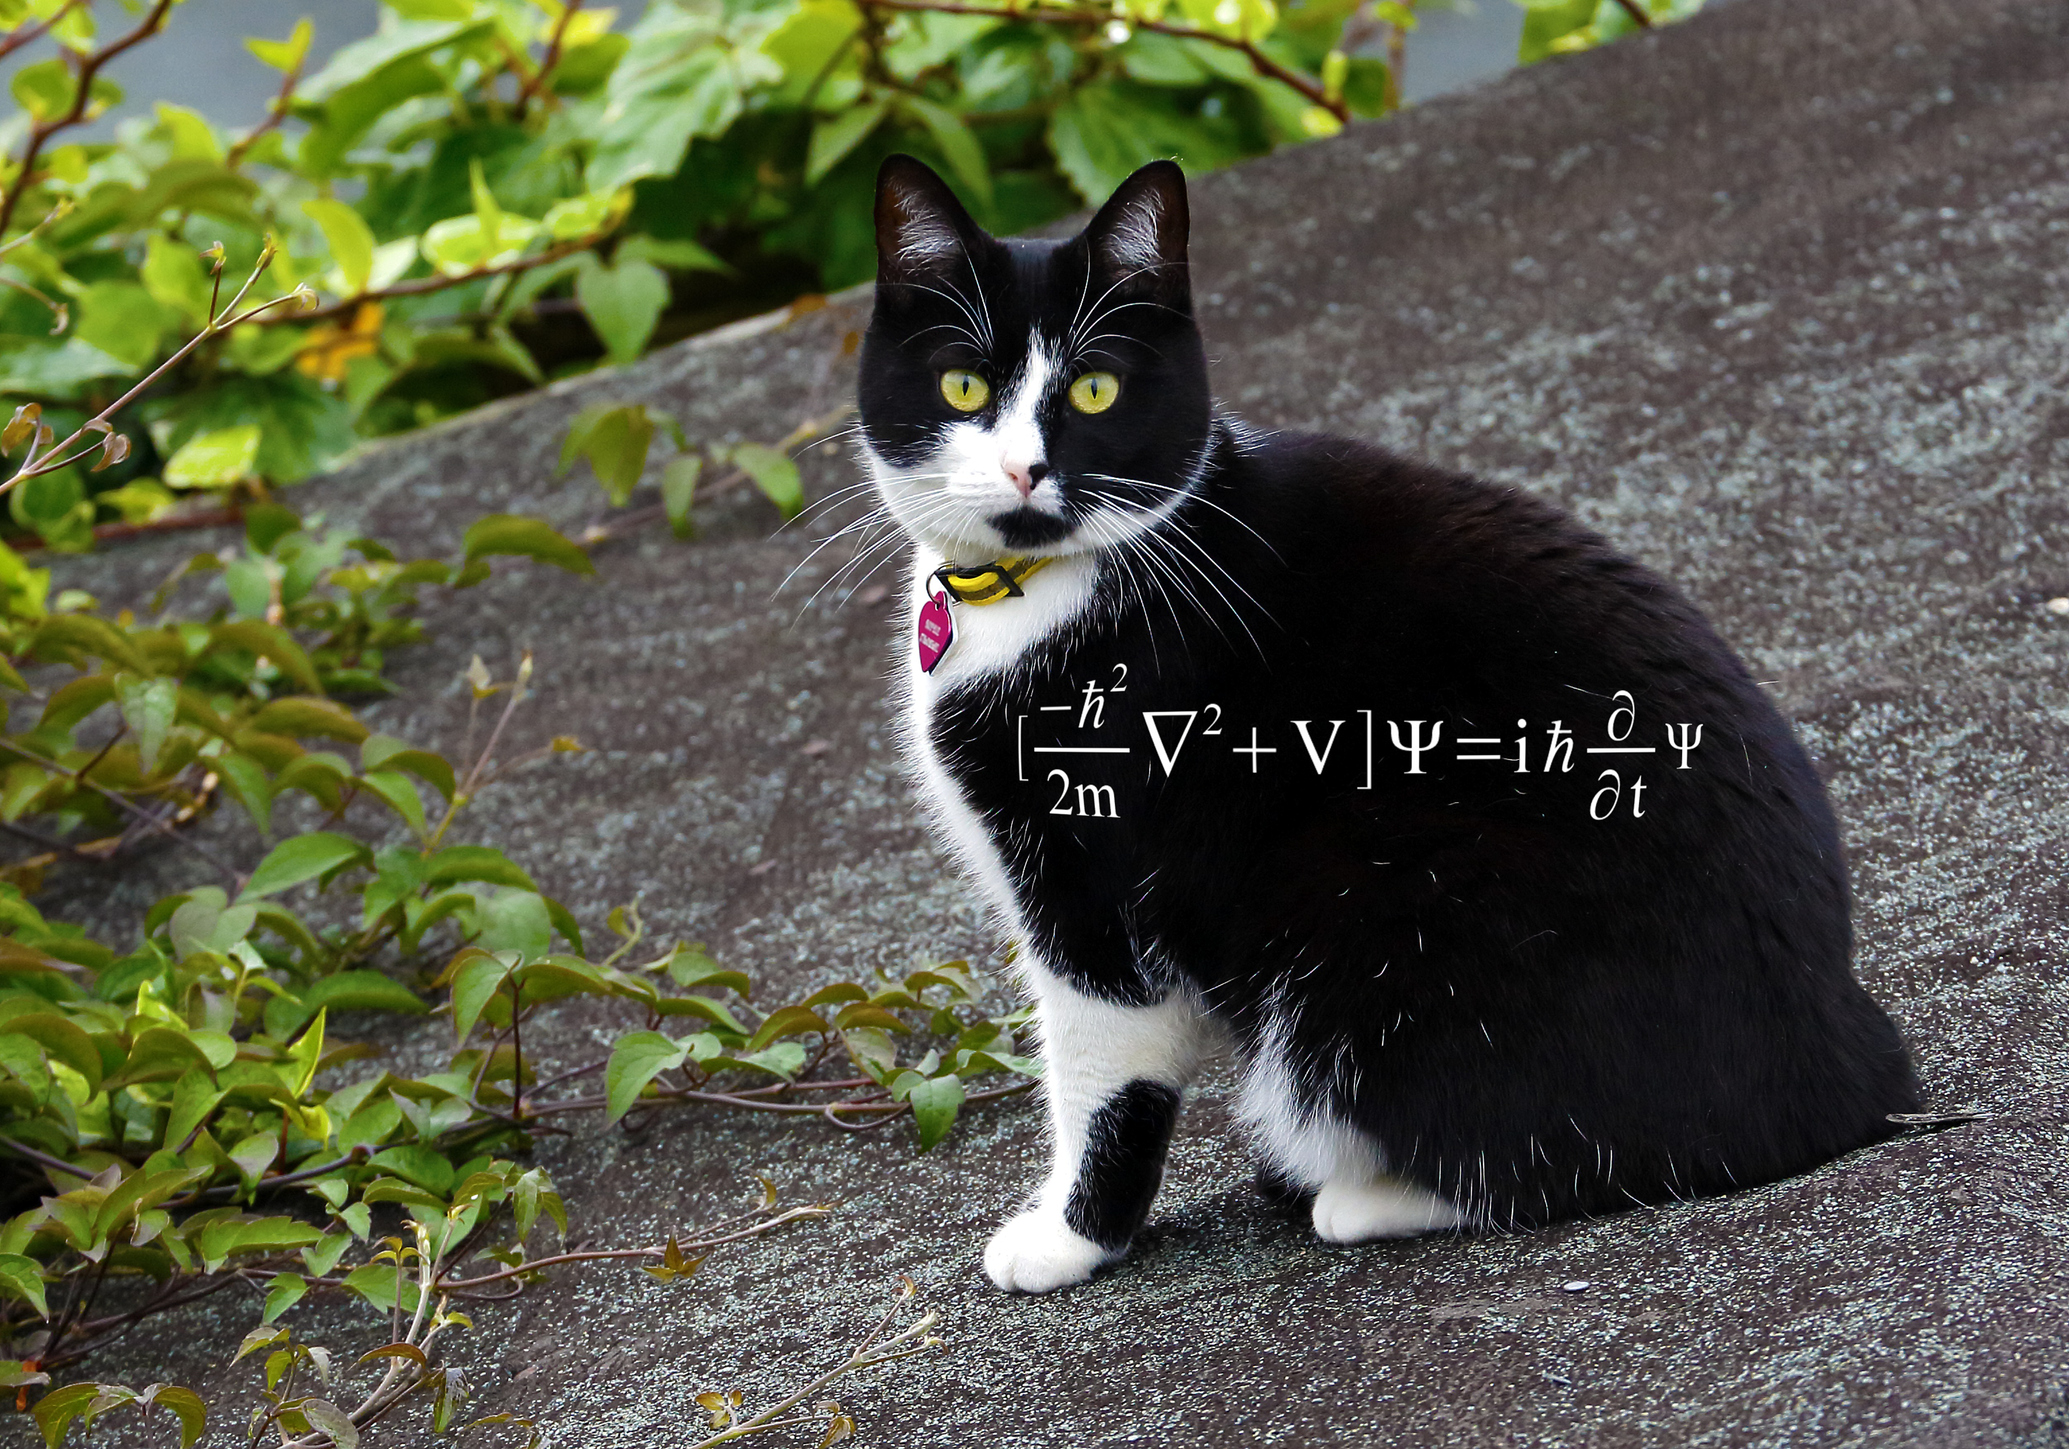 A photograph of a cat and Schrodinger's wave equation.